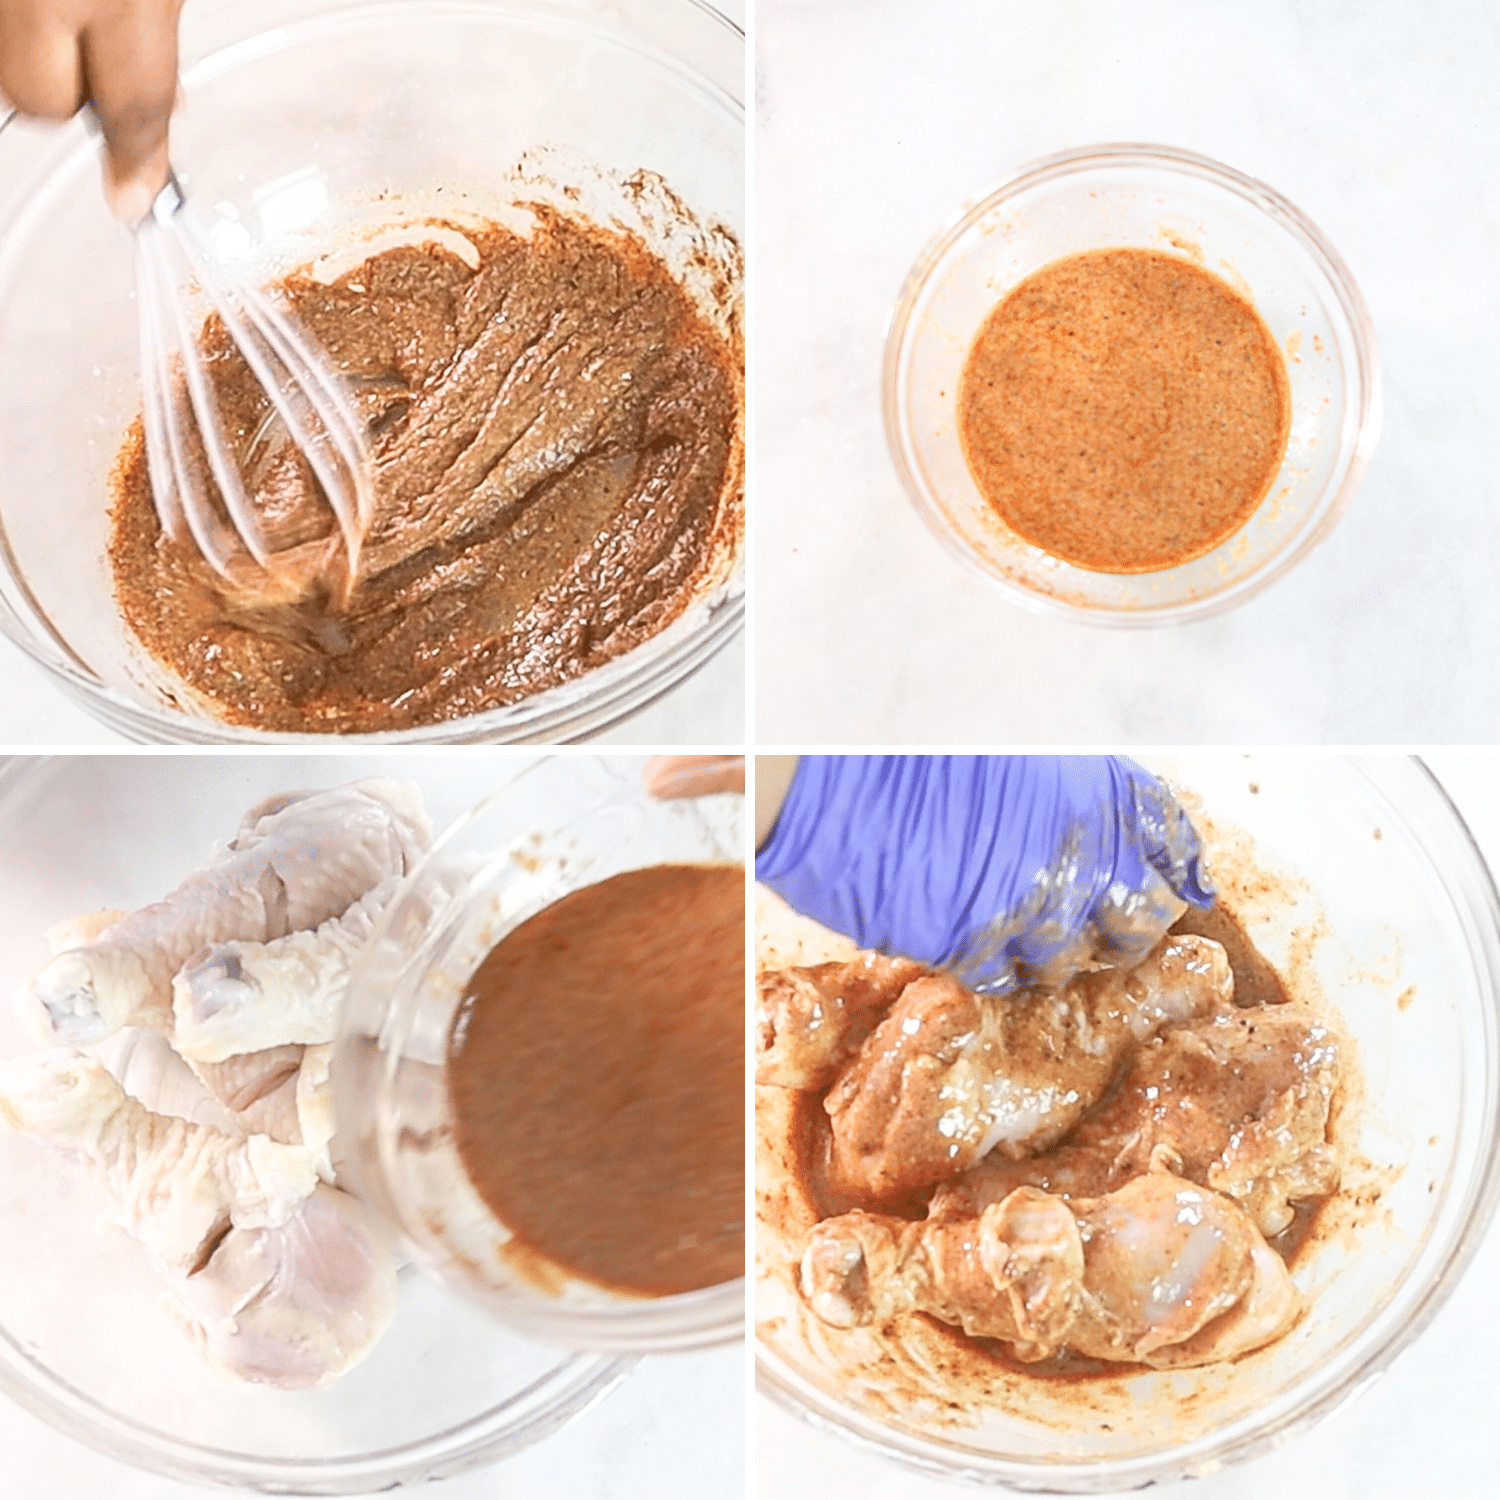 step by step photos for making Chicken Masala in the Air Fryer by first marinating the chicken pieces in an Indian masala paste.